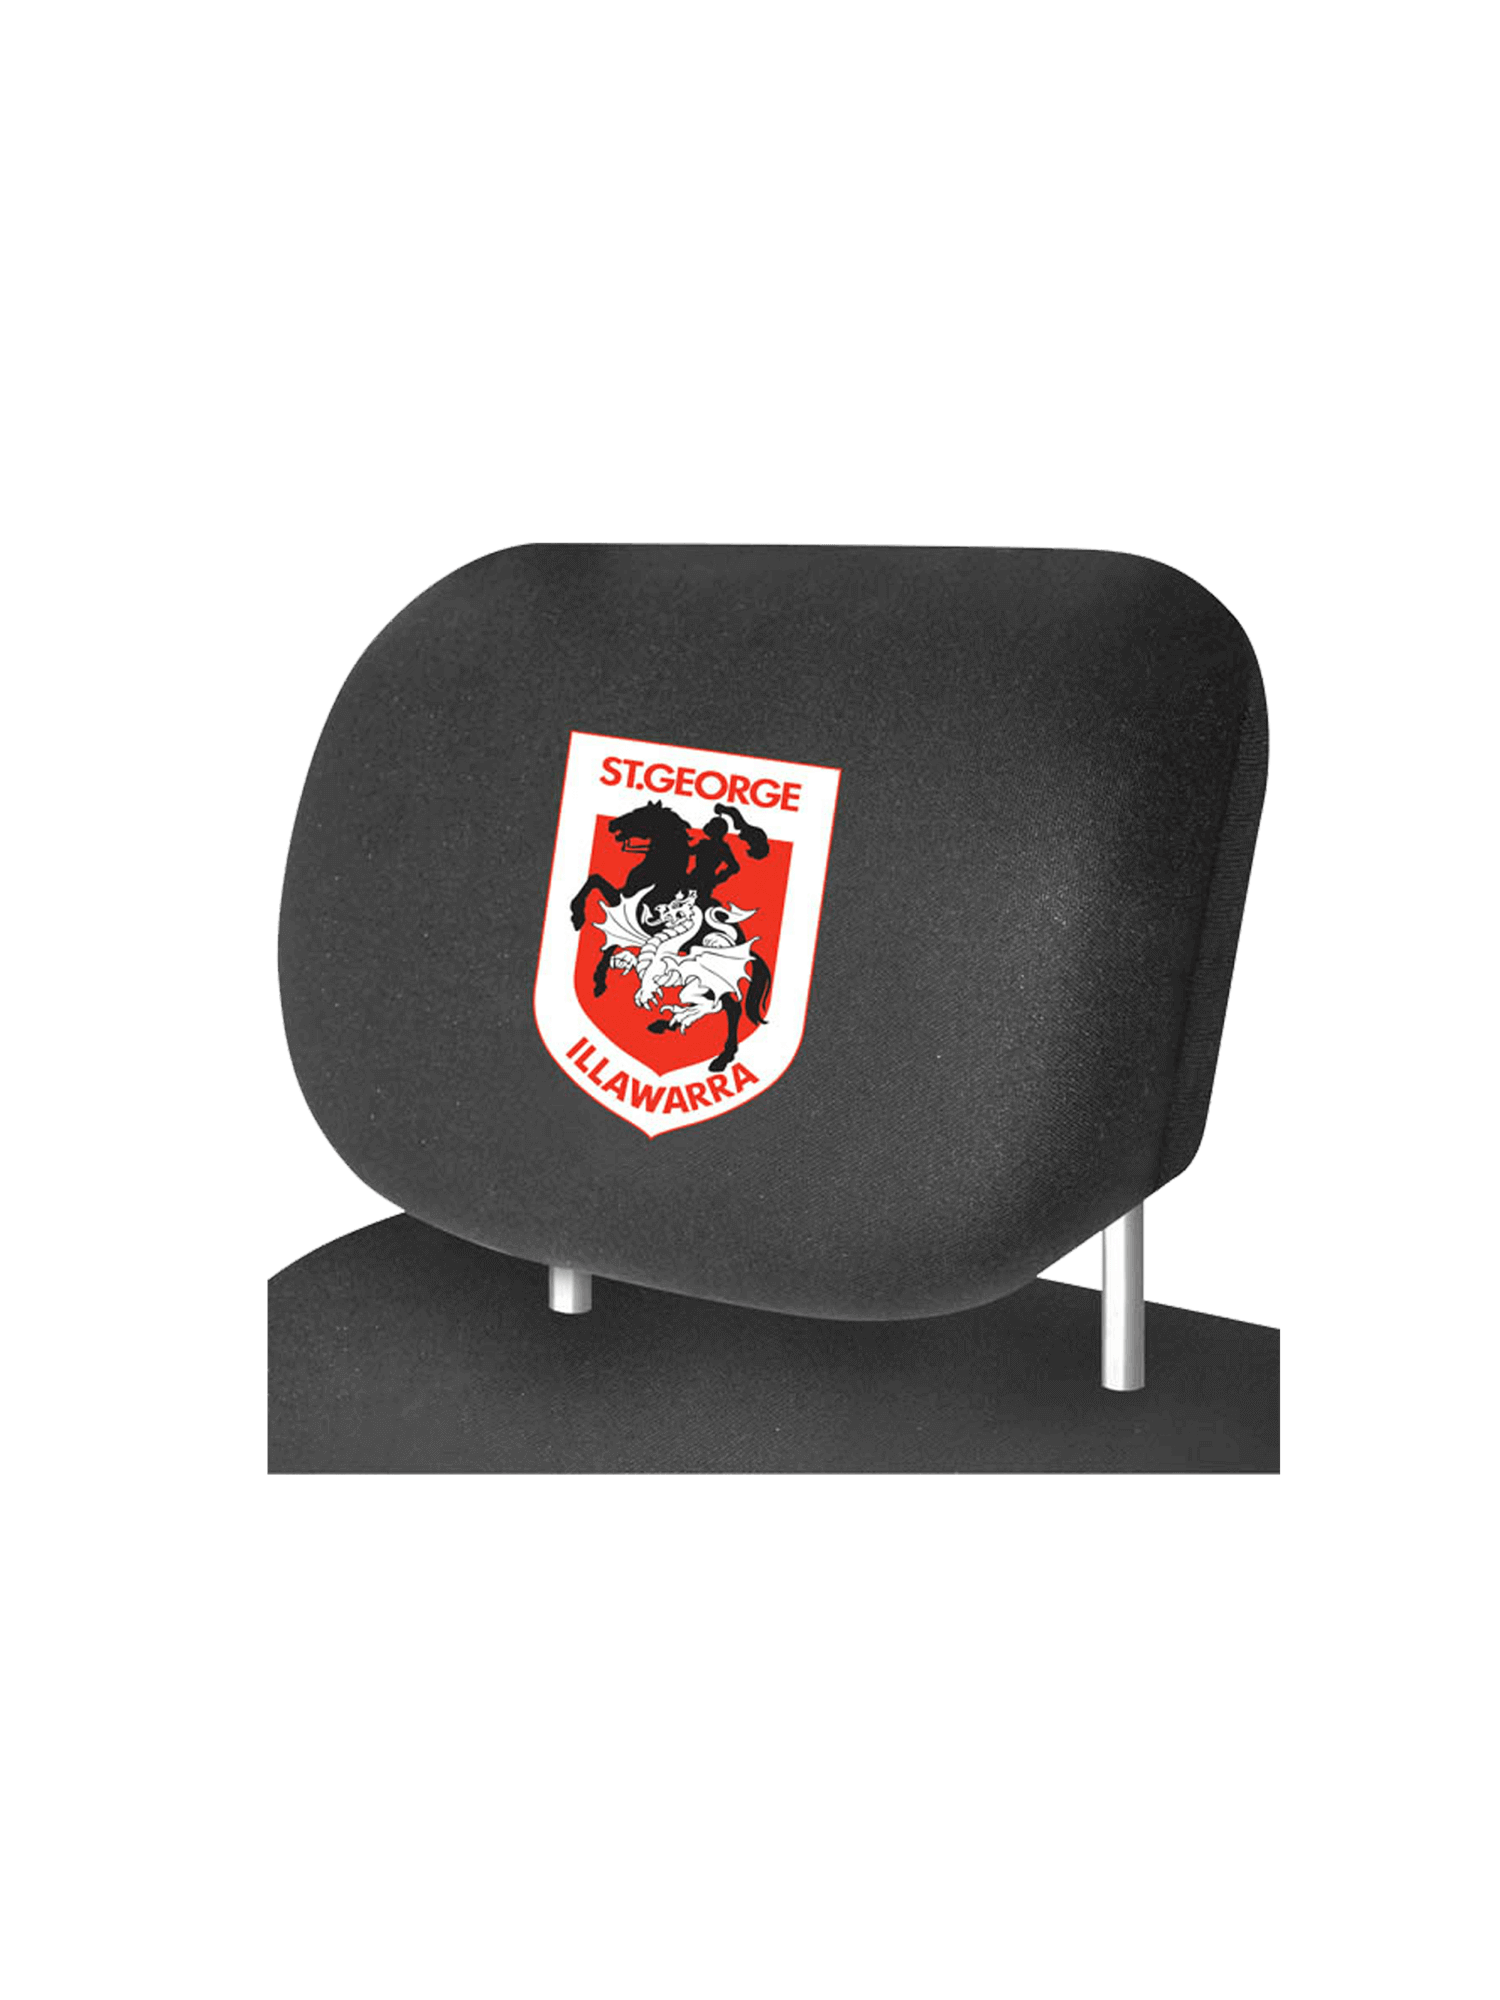 ST. GEORGE DRAGONS OFFICIAL HEADREST COVER_AT GEORGE ILLAWARRA DRAGONS_STUBBY CLUB